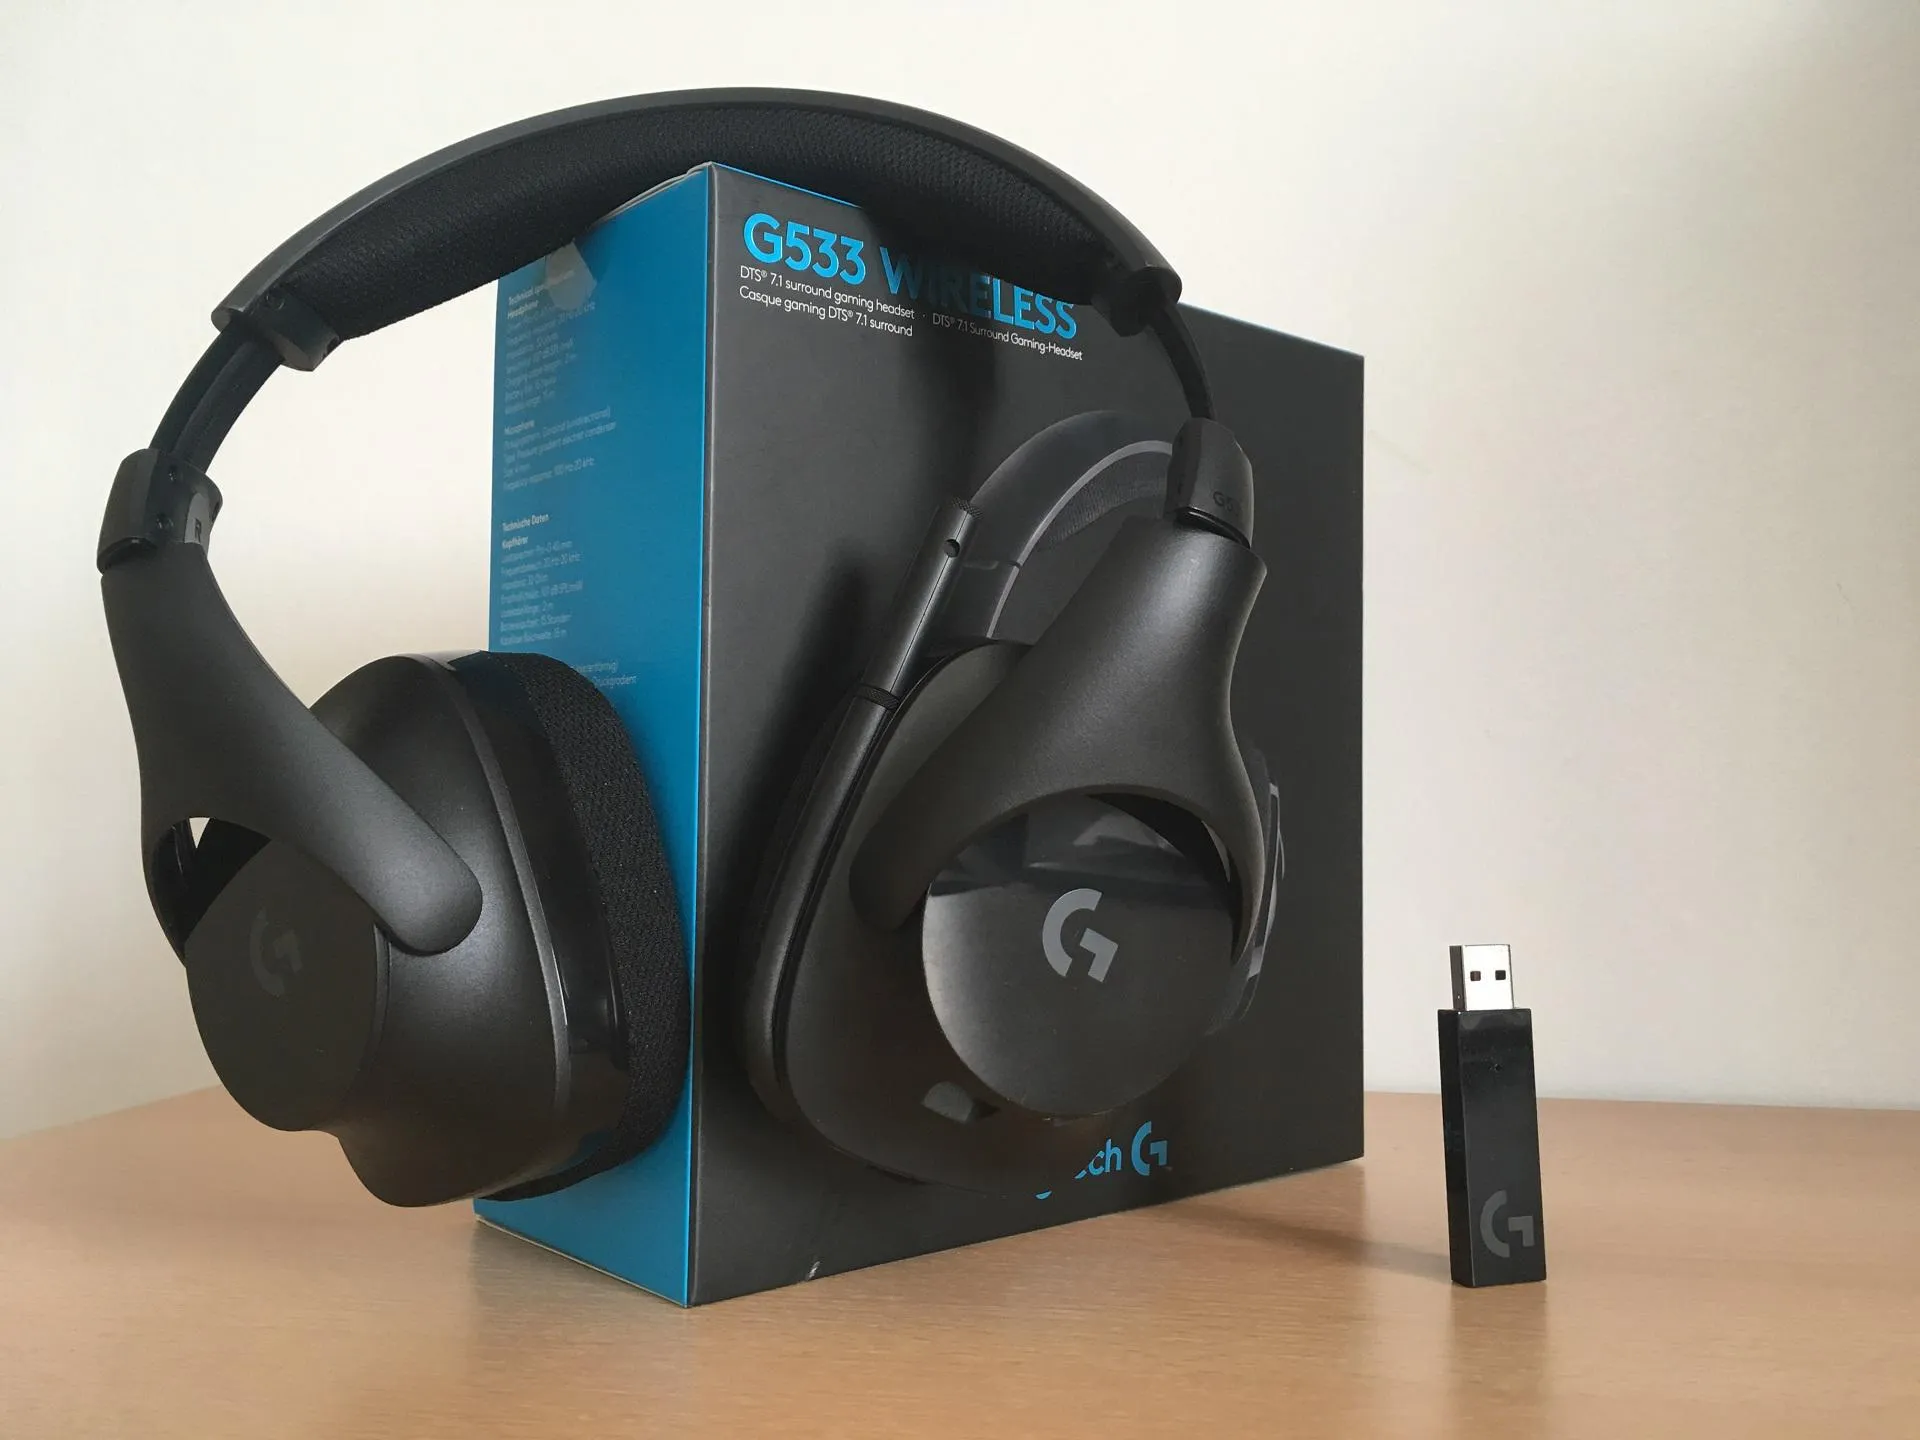 logitech g533 wireless gaming headset review pak je voorsprong 104933 5f1602579059